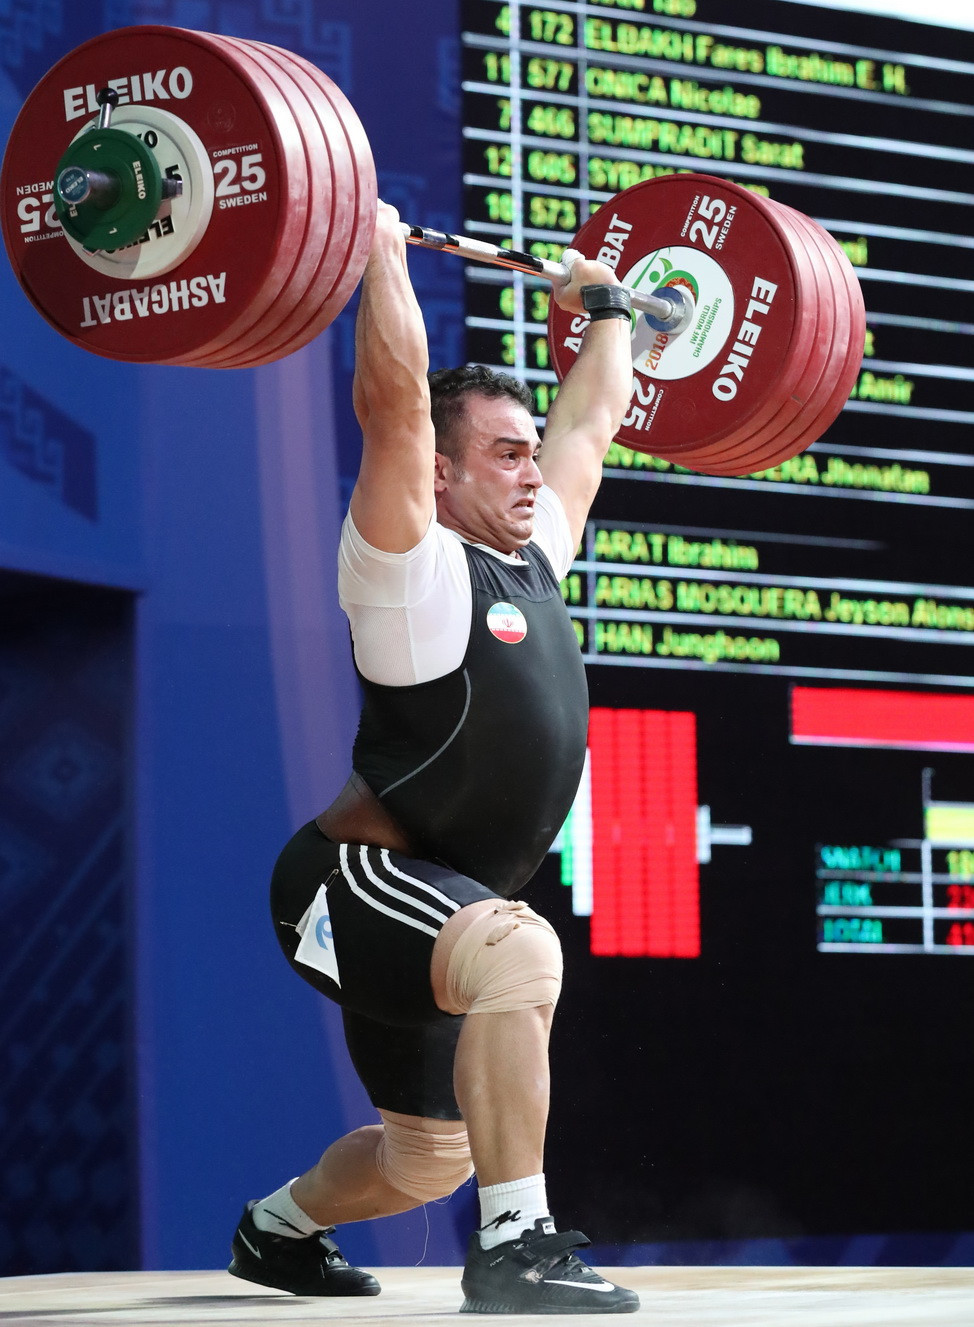 Rio 2016 Olympic gold medallist Sohrab Moradi dominated the men's 96 kilograms category on day seven of the 2018 International Weightlifting Federation World Championships in Turkmenistan's capital Ashgabat ©IWF